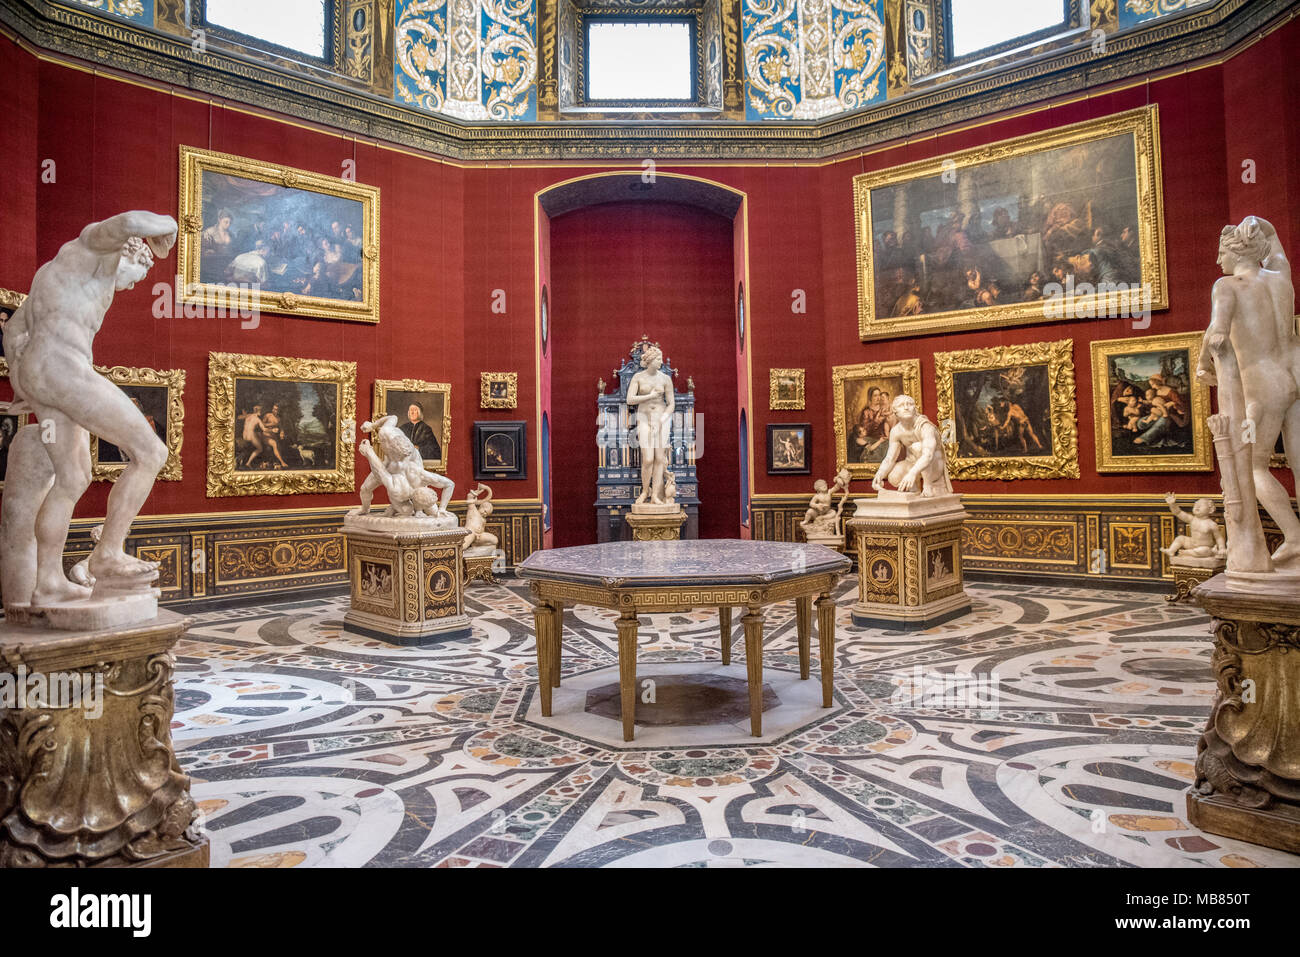 The Uffizi Gallery is a prominent art museum located adjacent to the Piazza della Signoria in the Historic Centre of Florence. Stock Photo